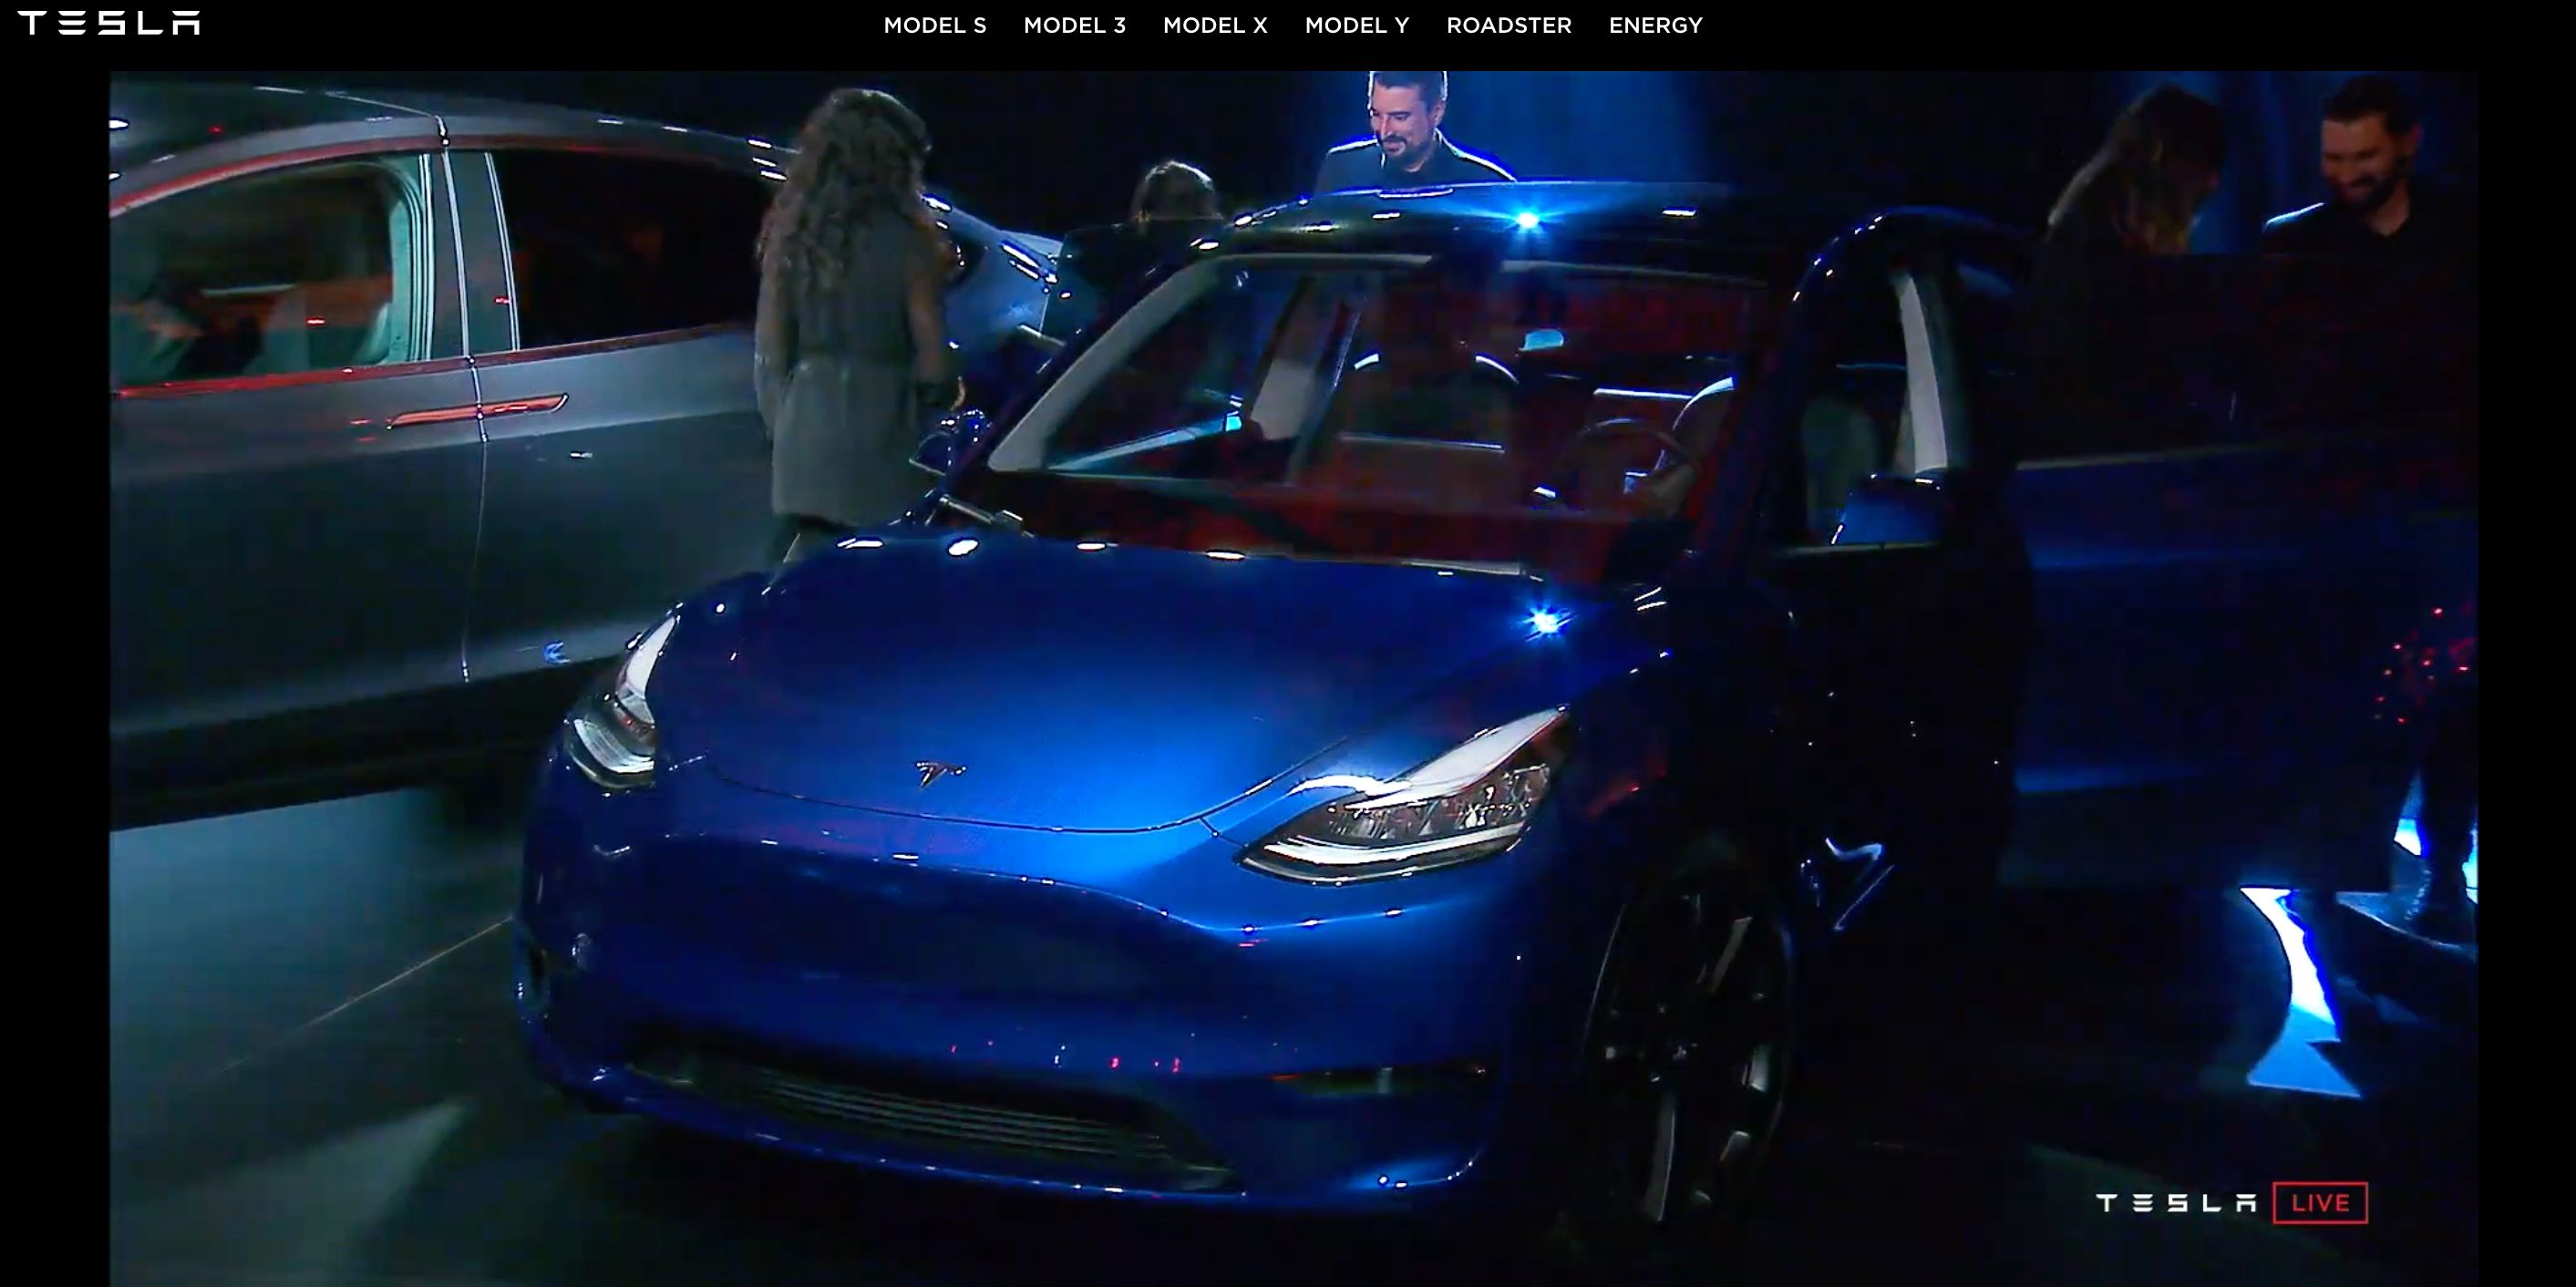 2019 The 2020 Tesla Model Y Is About to Debut, Watch It Live With Us!